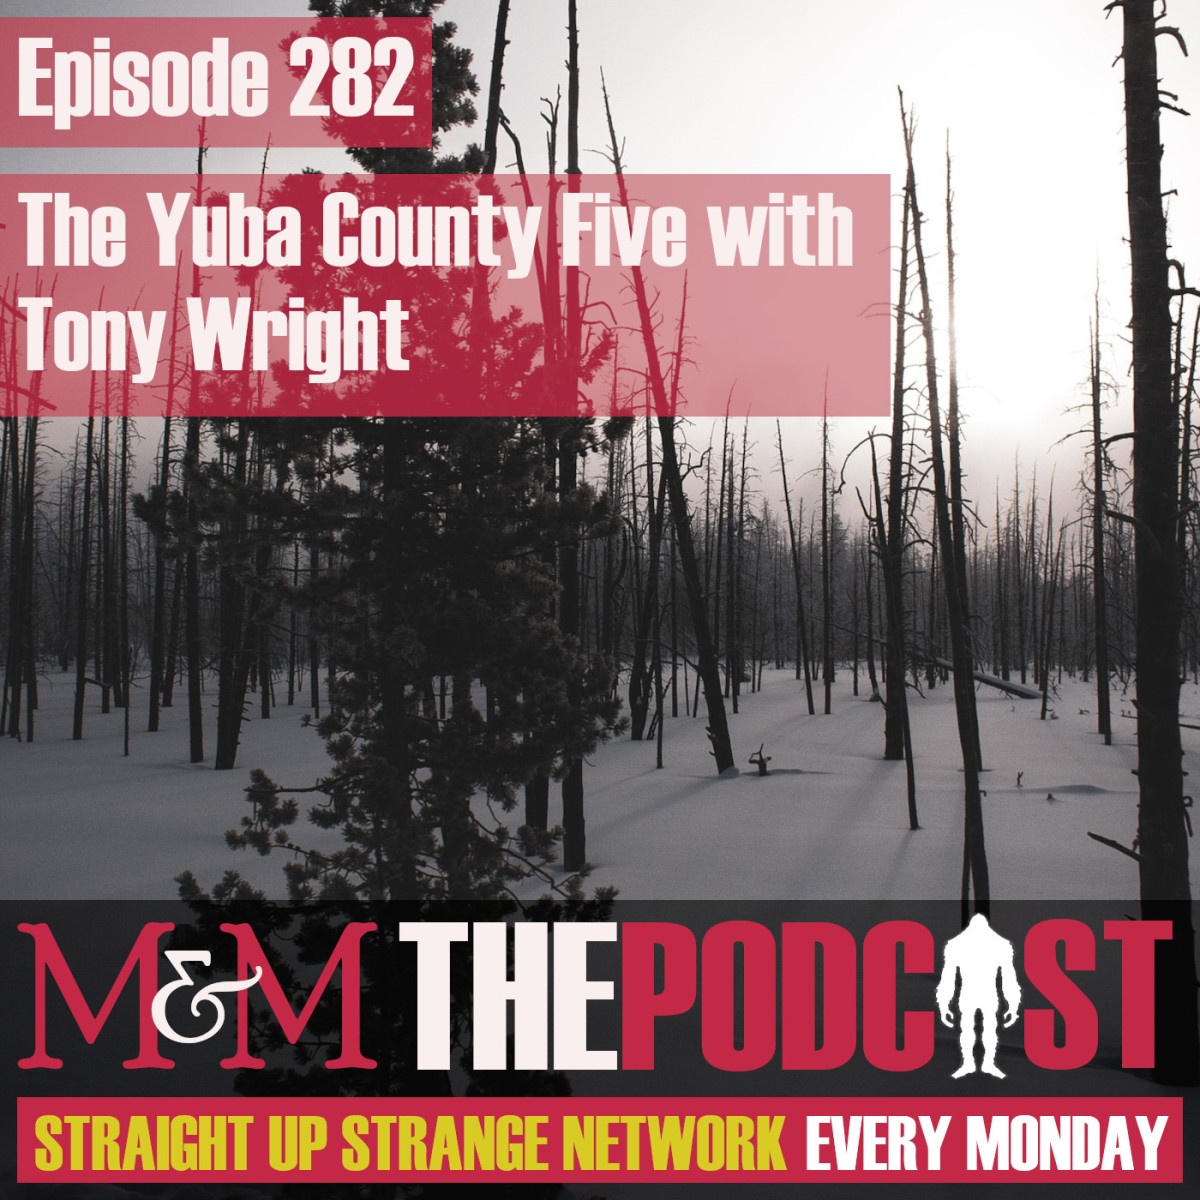 Episode 282: The Yuba County Five with Tony Wright